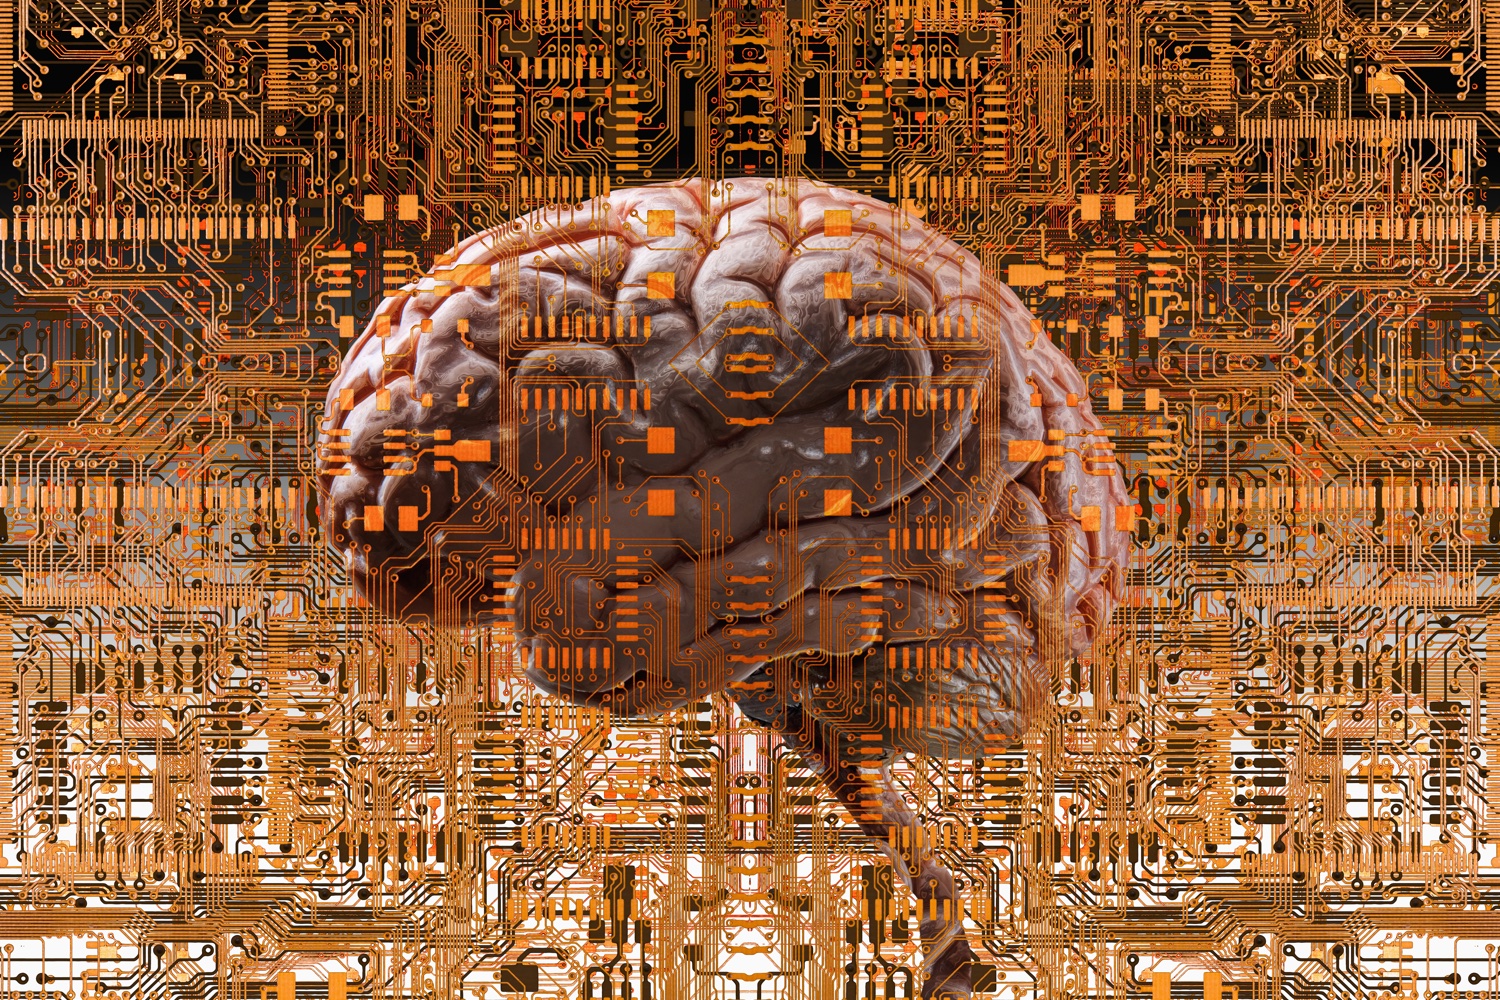 Brain under layers of circuit boards